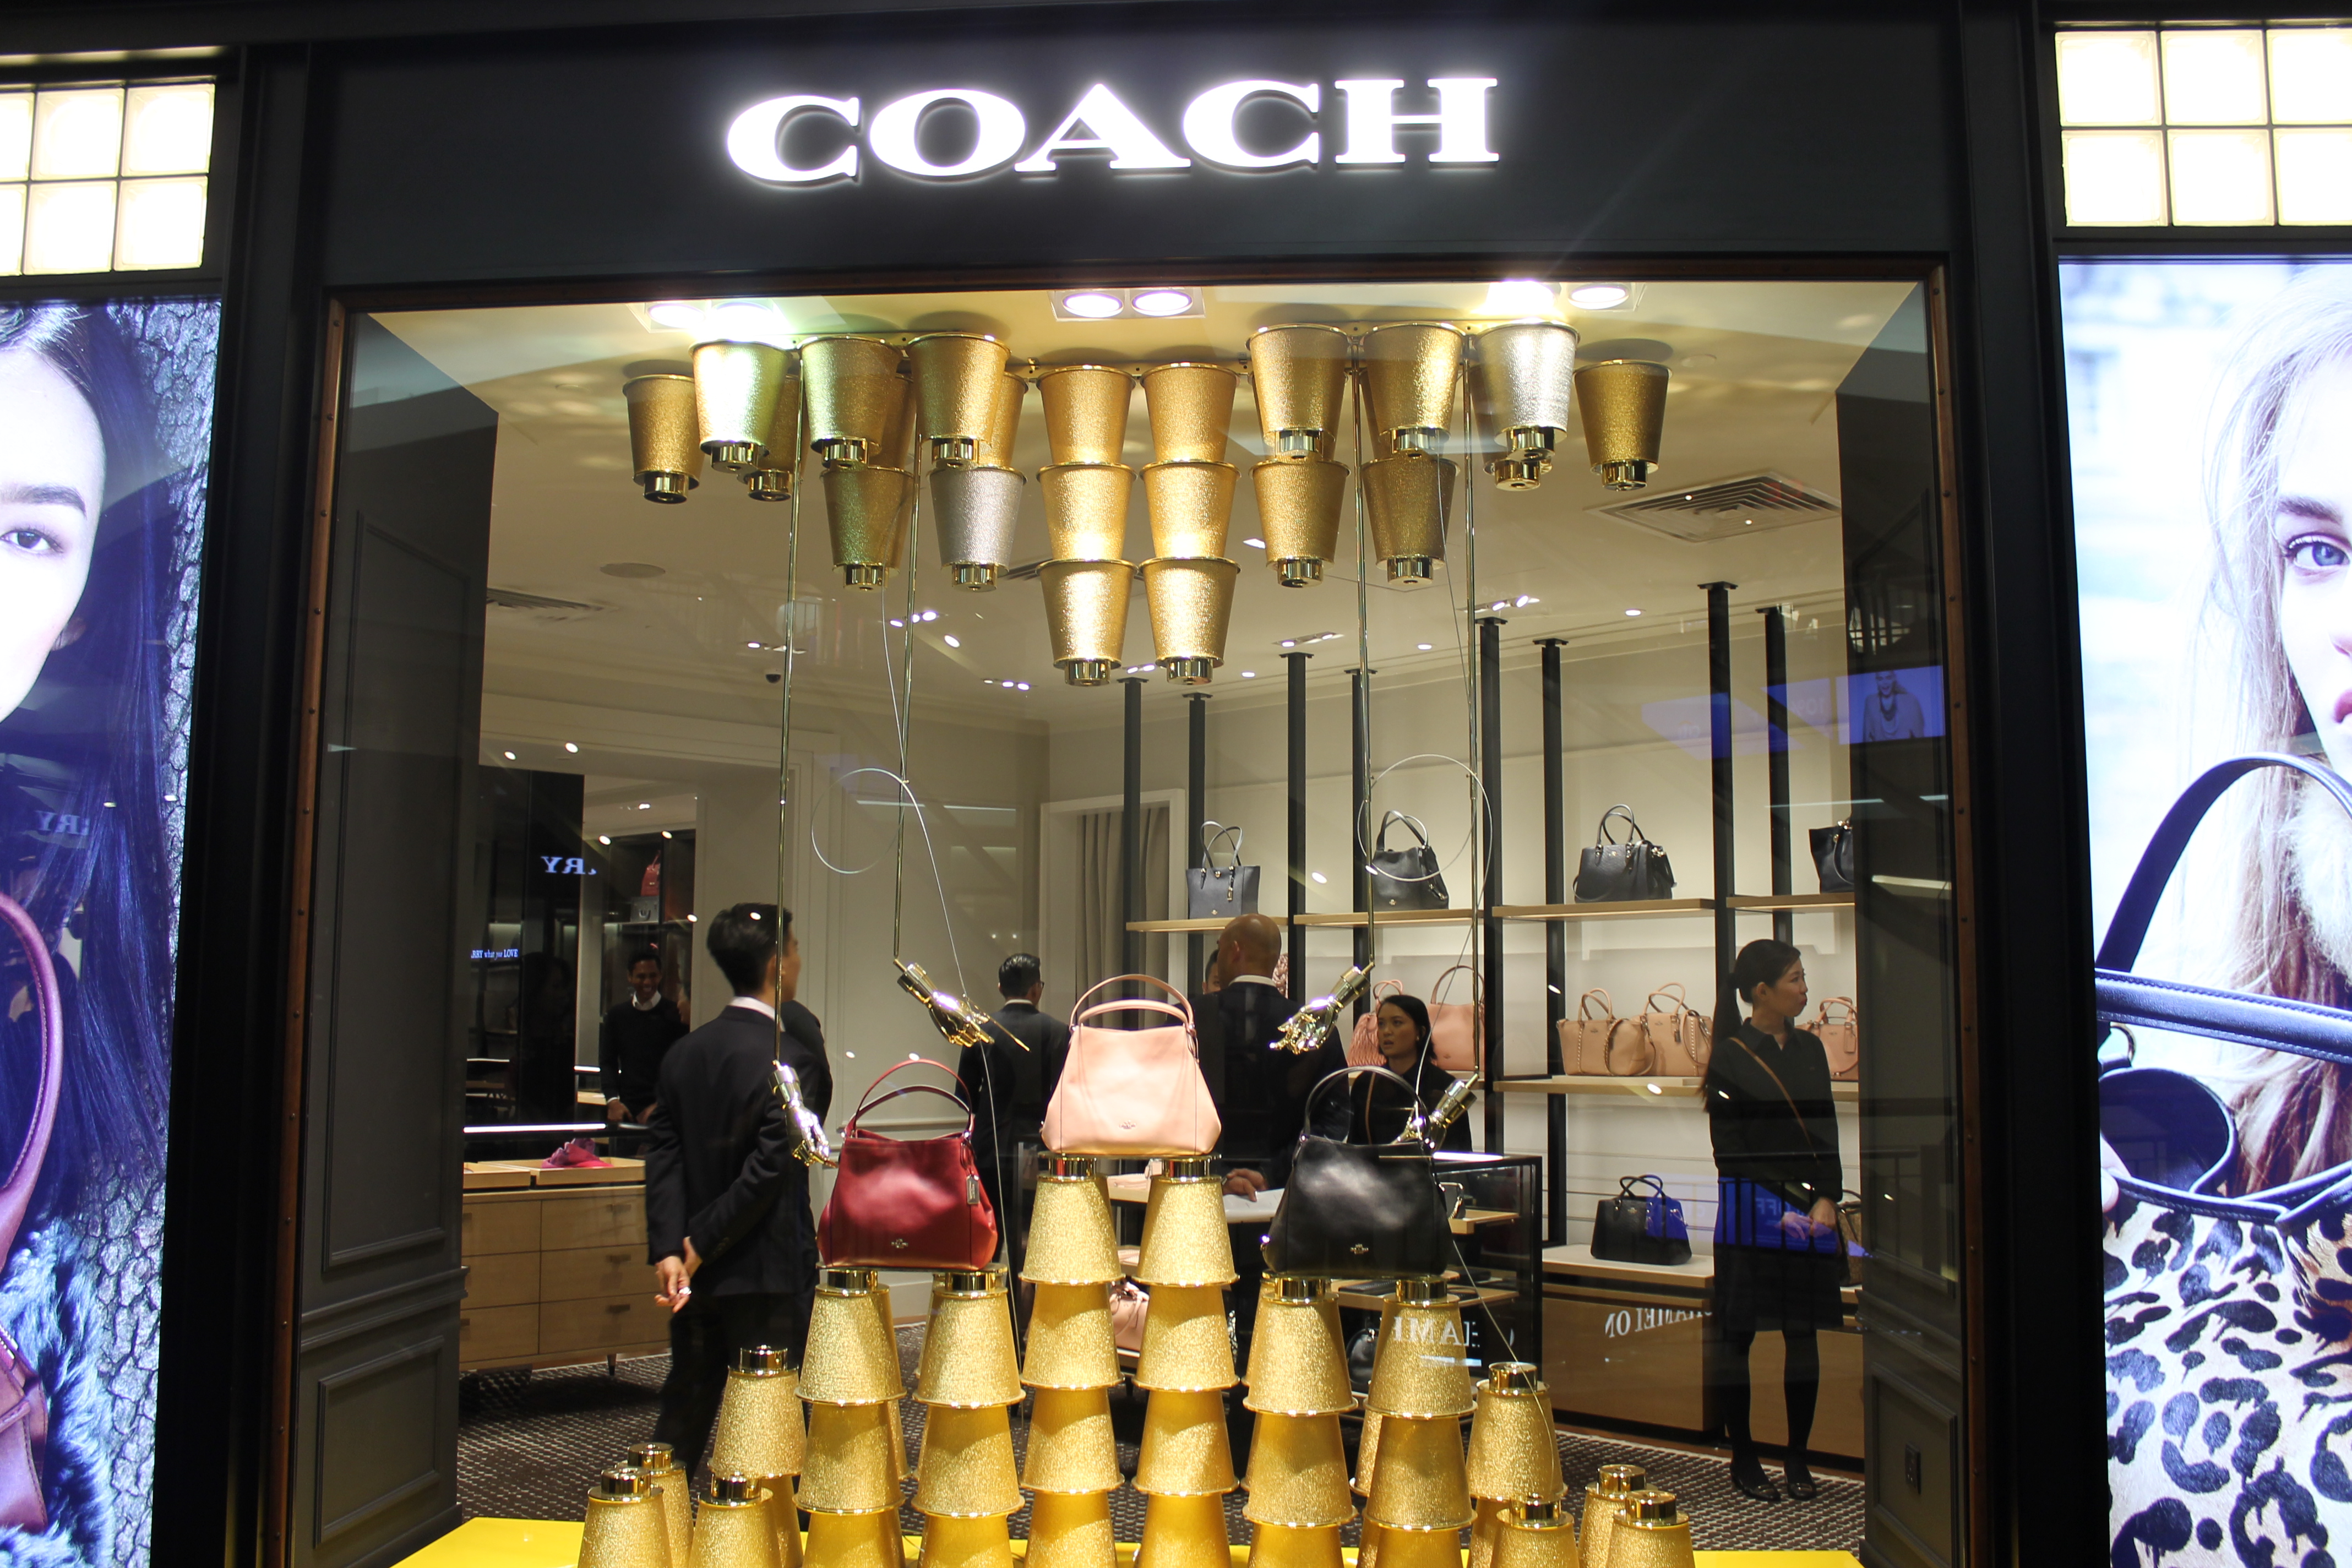 The Coach - A Brand That Stands For Authenticity